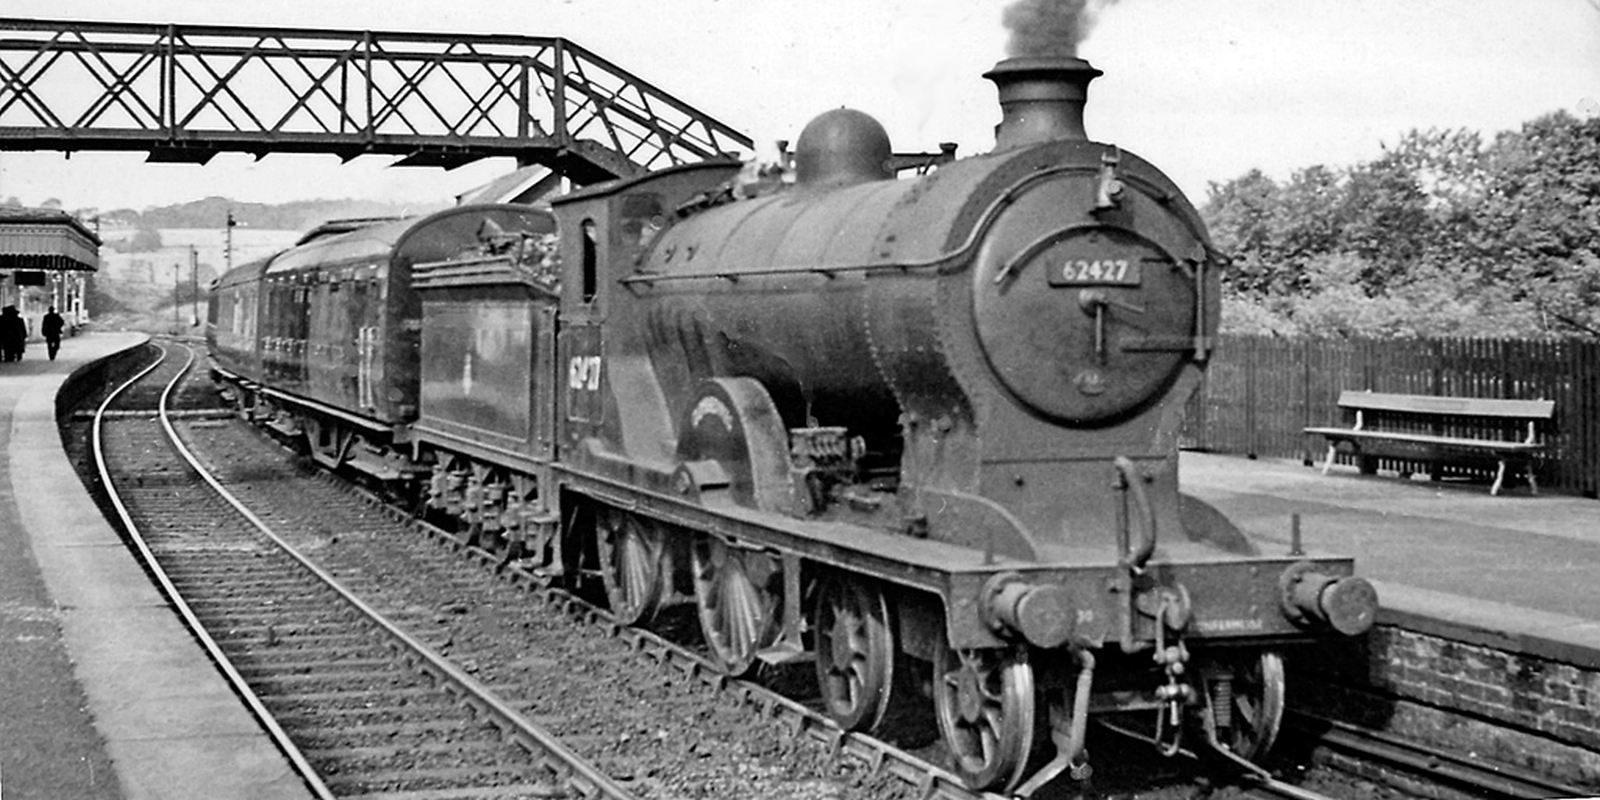 LNER Class D30 as British Railways No. 62427 “Dumbiedykes” in September 1957 at Inverkeithing